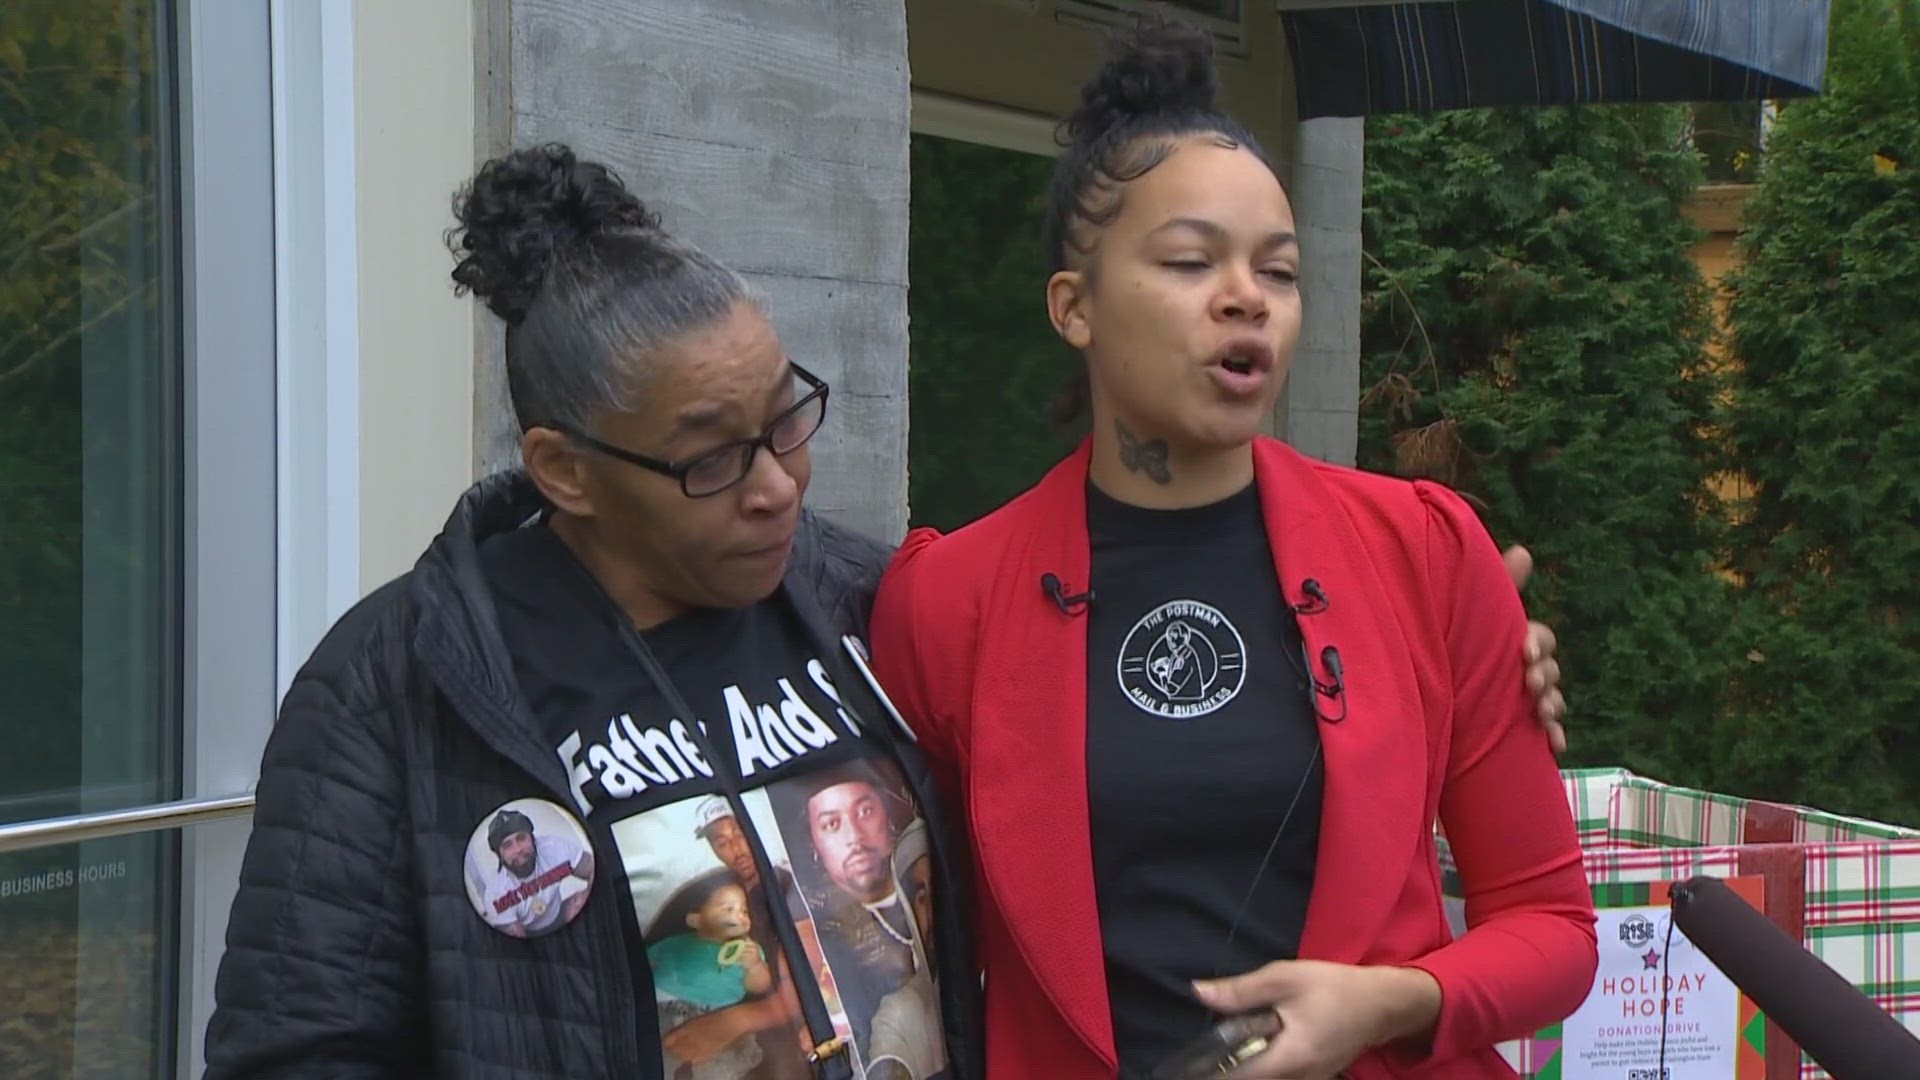 Small businesses in Seattle say gun violence is taking a toll, especially at one store where the owner, a beloved community leader, was shot and killed last year.